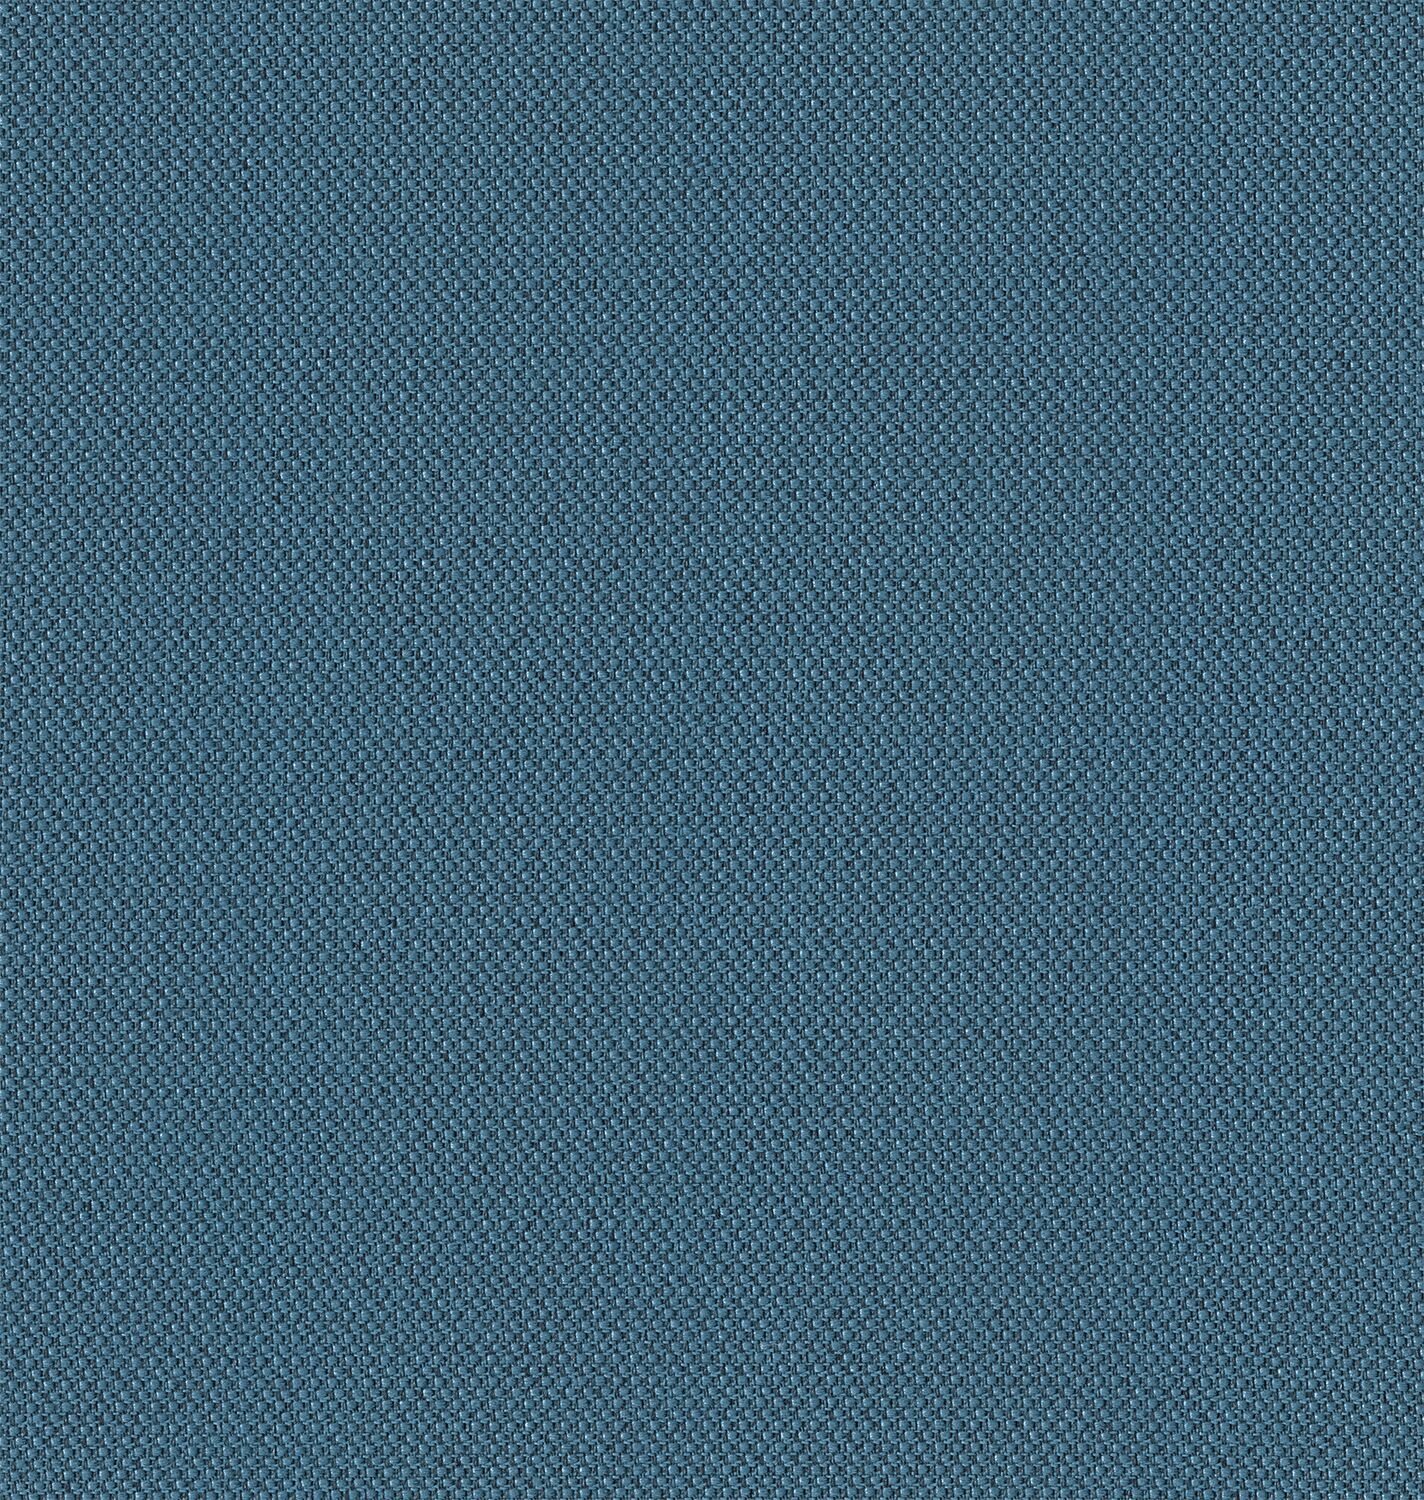 Biotope - Hot Spring - 4113 - 12 - Half Yard Tileable Swatches